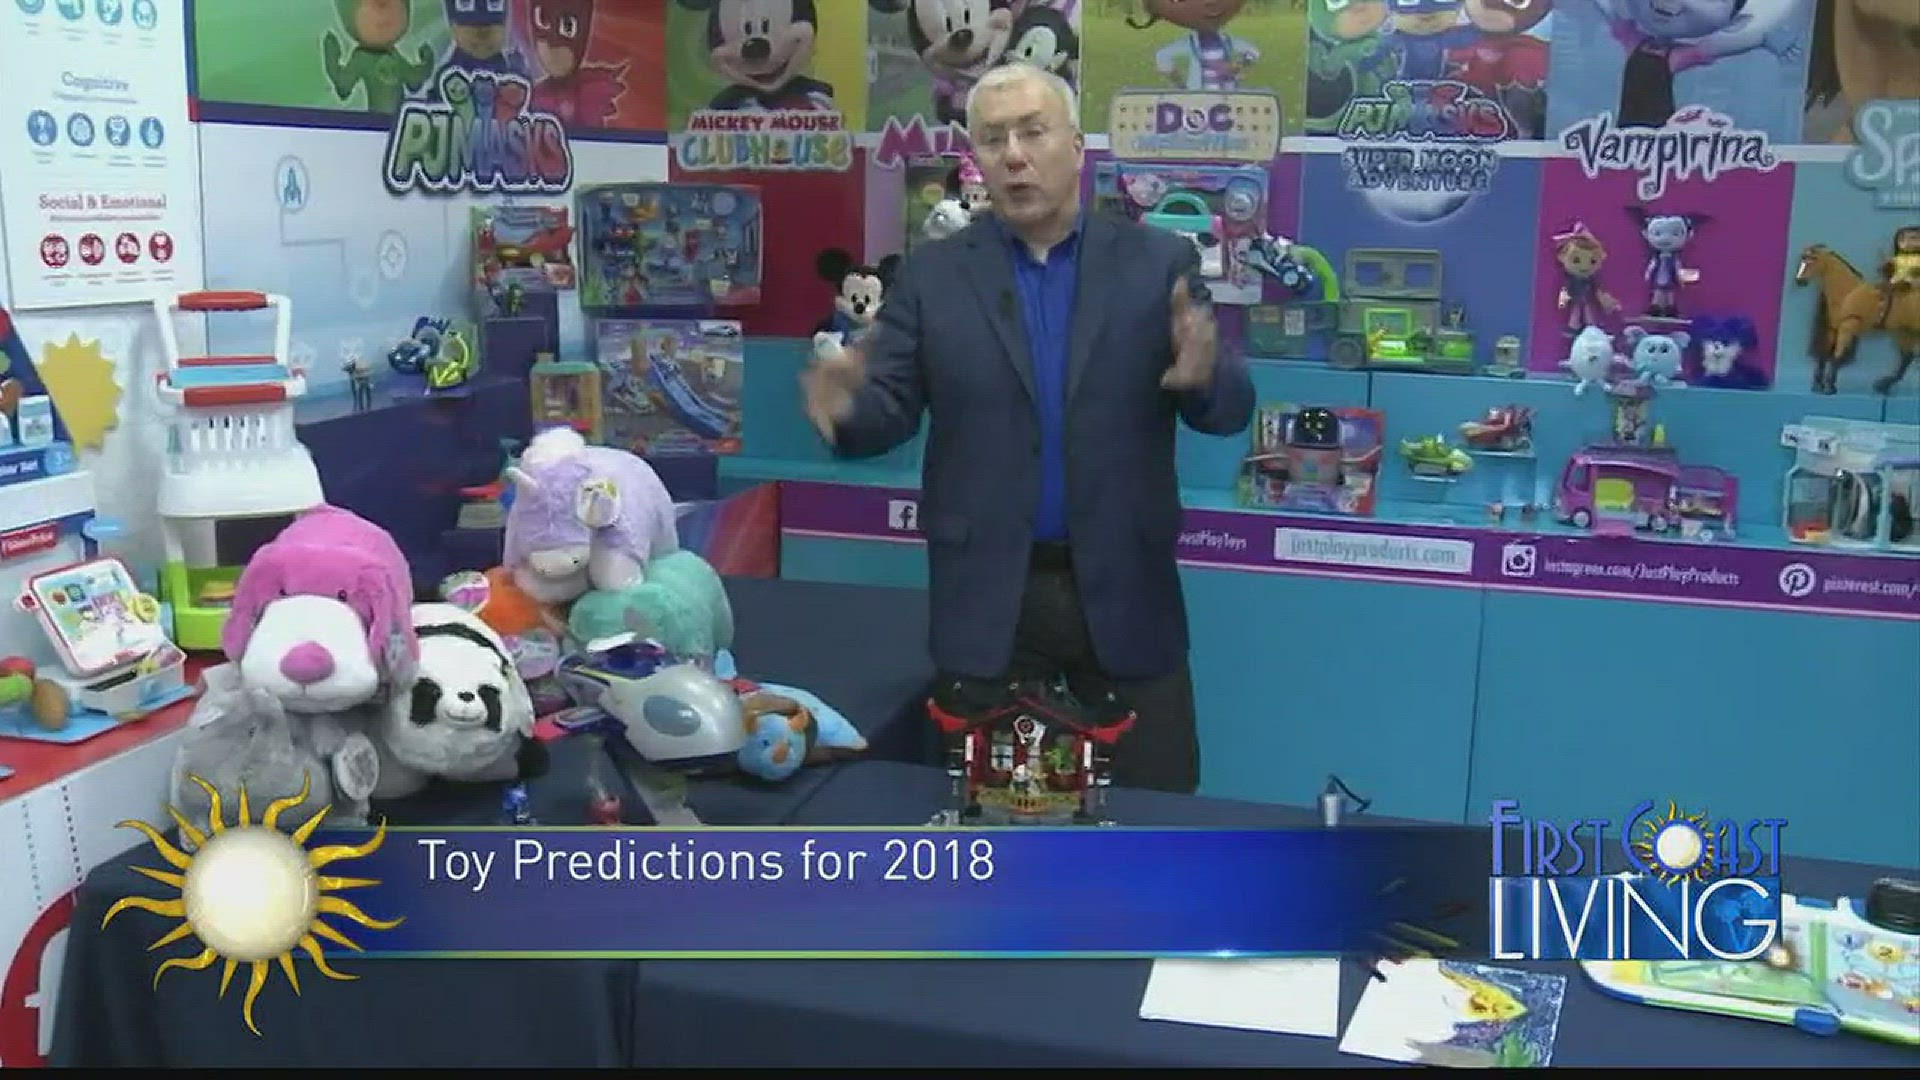 Toy Predictions for 2018